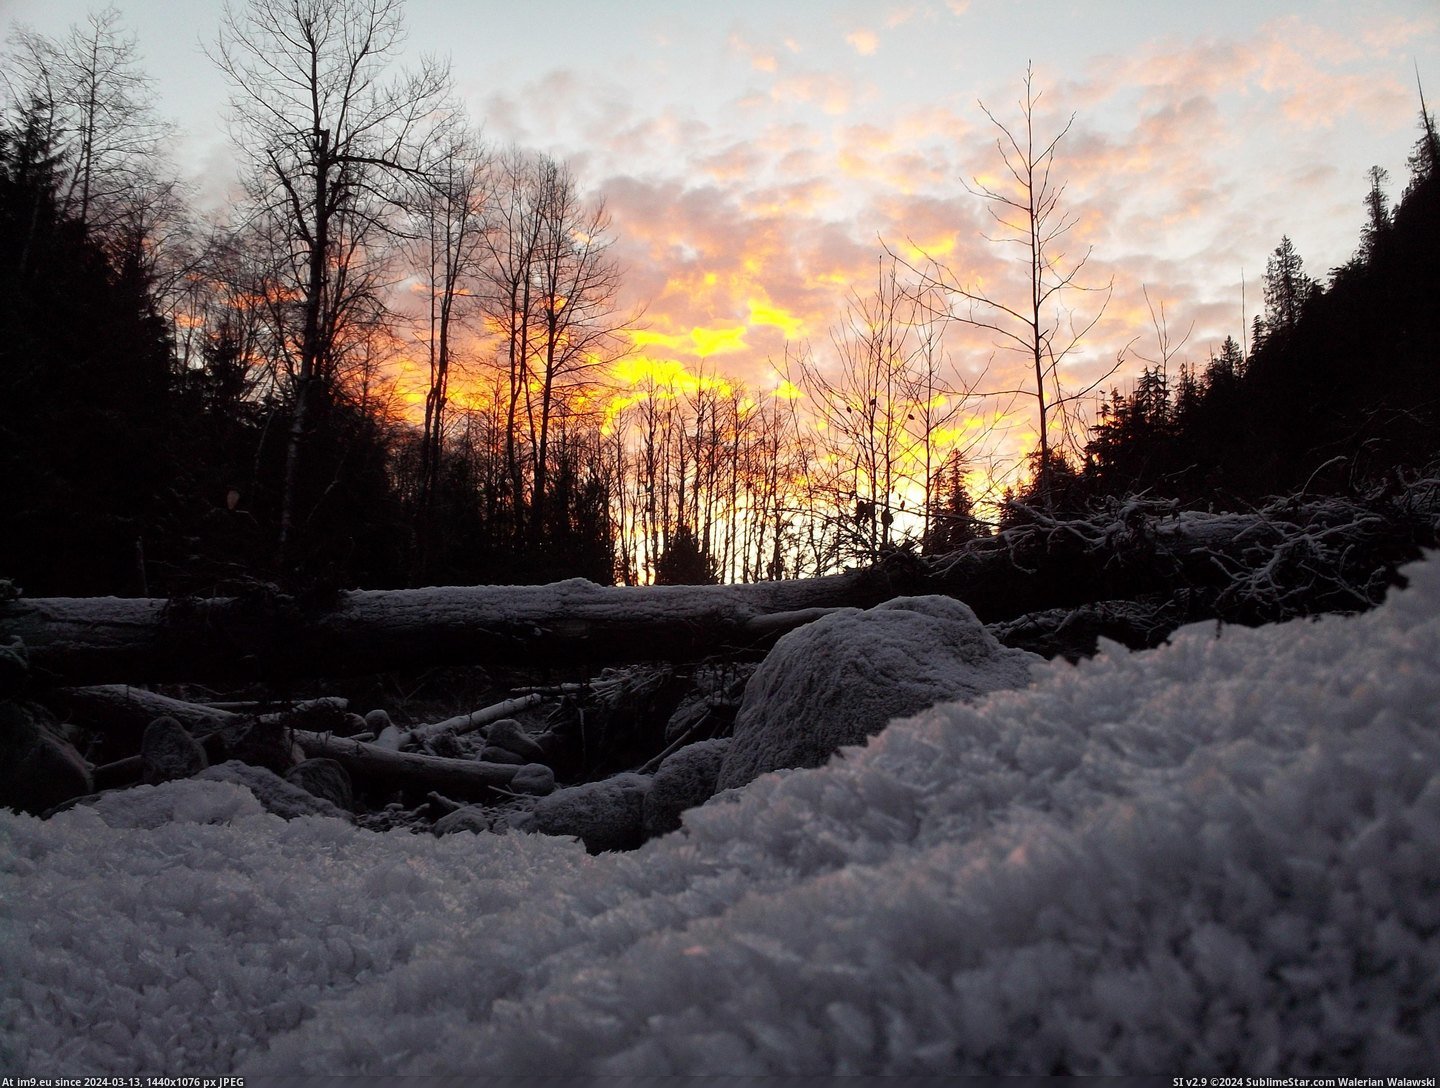 #State #River #Ice #Fork #Nooksack #Fire #Sunrise #4000x3000 [Earthporn] Fire and Ice. Sunrise near the Middle Fork of the Nooksack River-WA state. [OC](4000x3000) Pic. (Obraz z album My r/EARTHPORN favs))